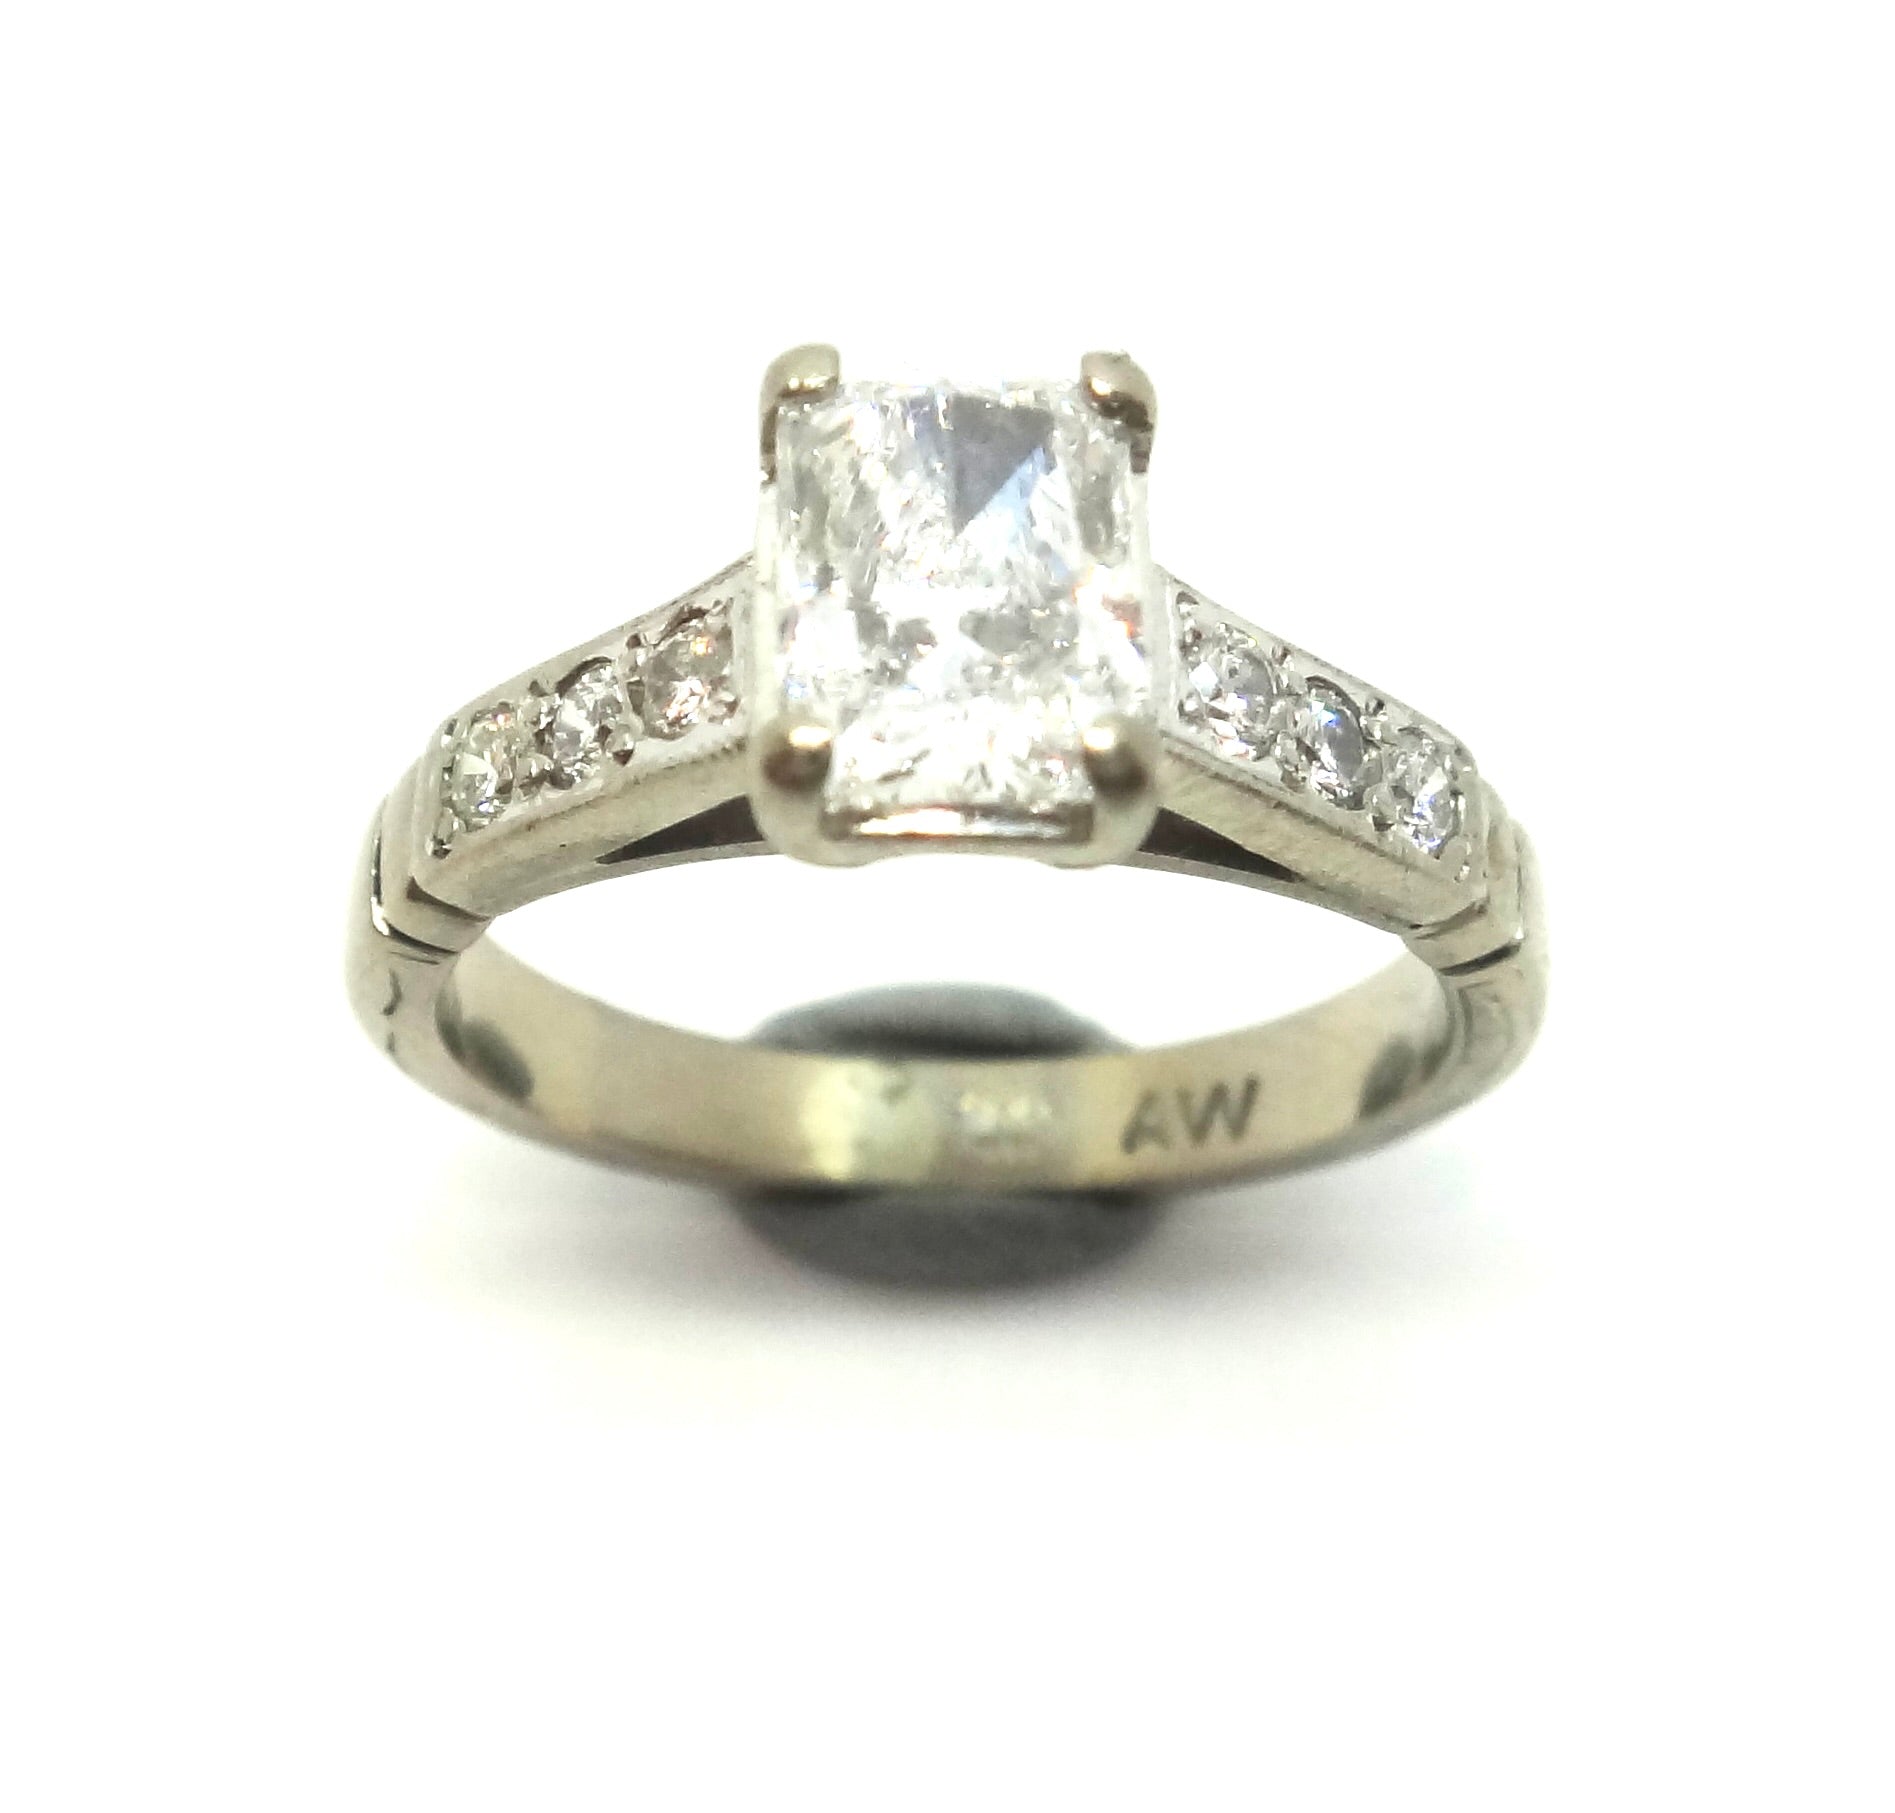 HANDMADE 18ct White Gold & Radiant Cut Diamond Ring with GIA & VAL $13,450